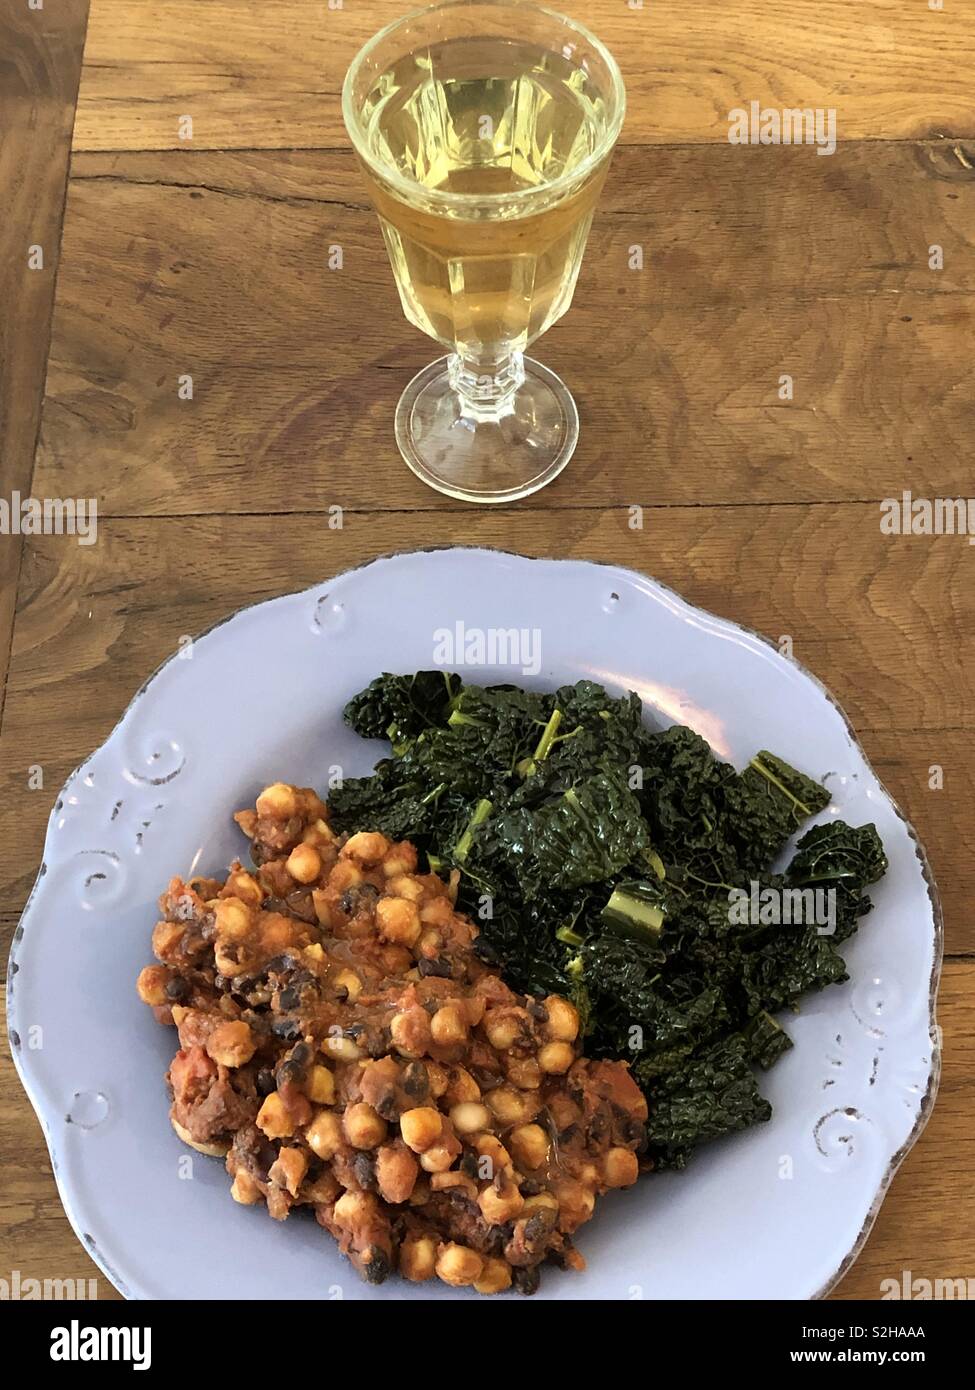 Healthy lunch with an organic glass of white wine and a dish of vegetables Stock Photo